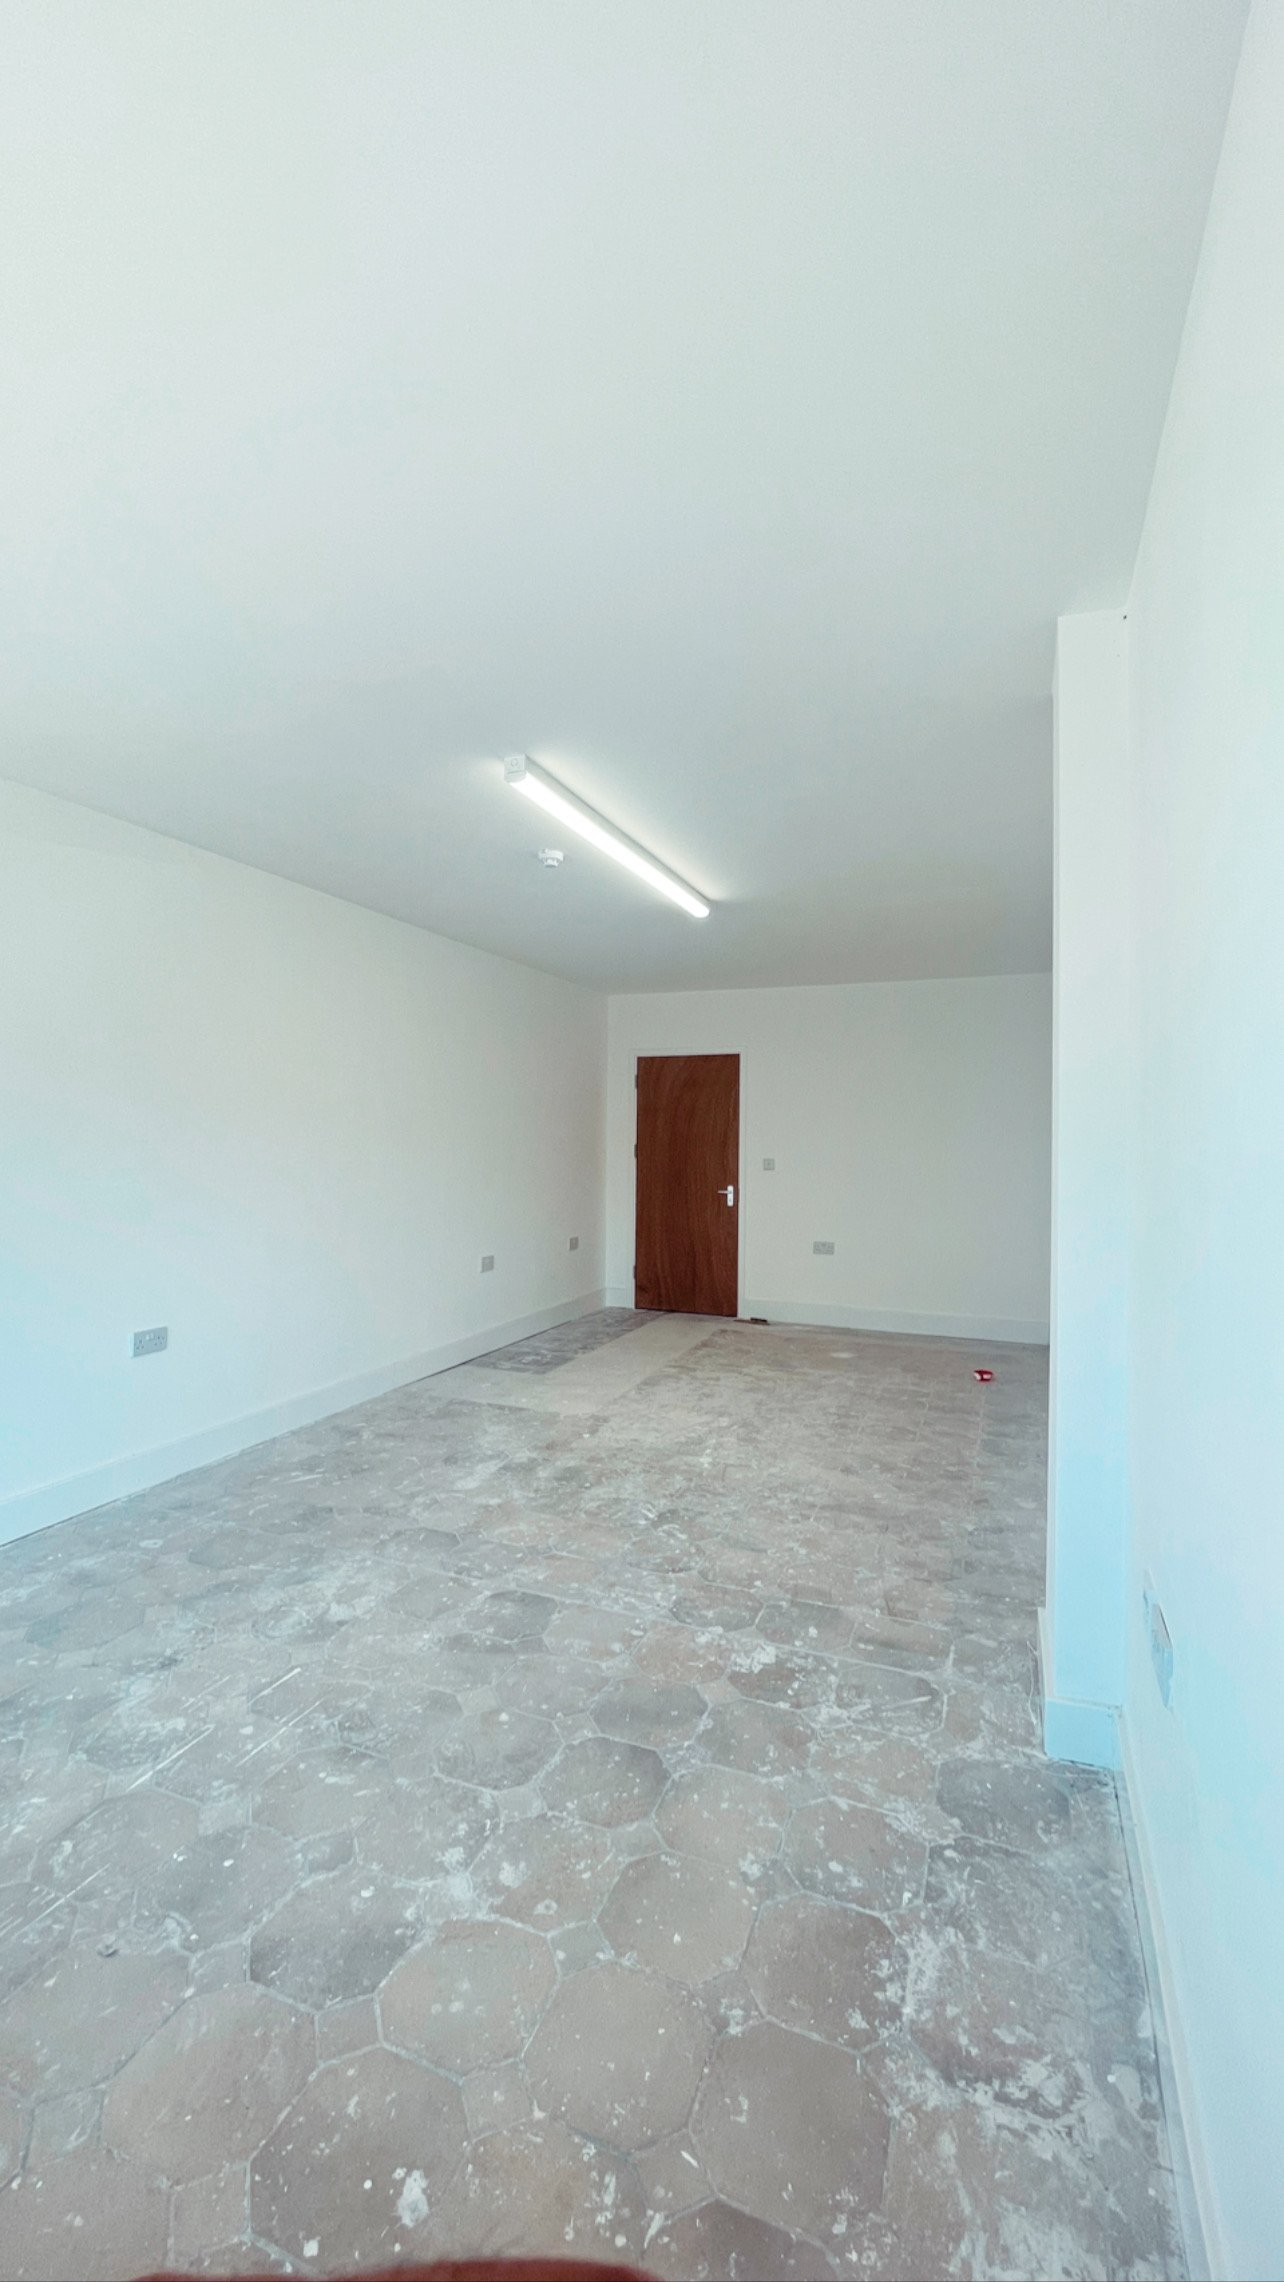 Creative/Commercial Space in Alperton beltere